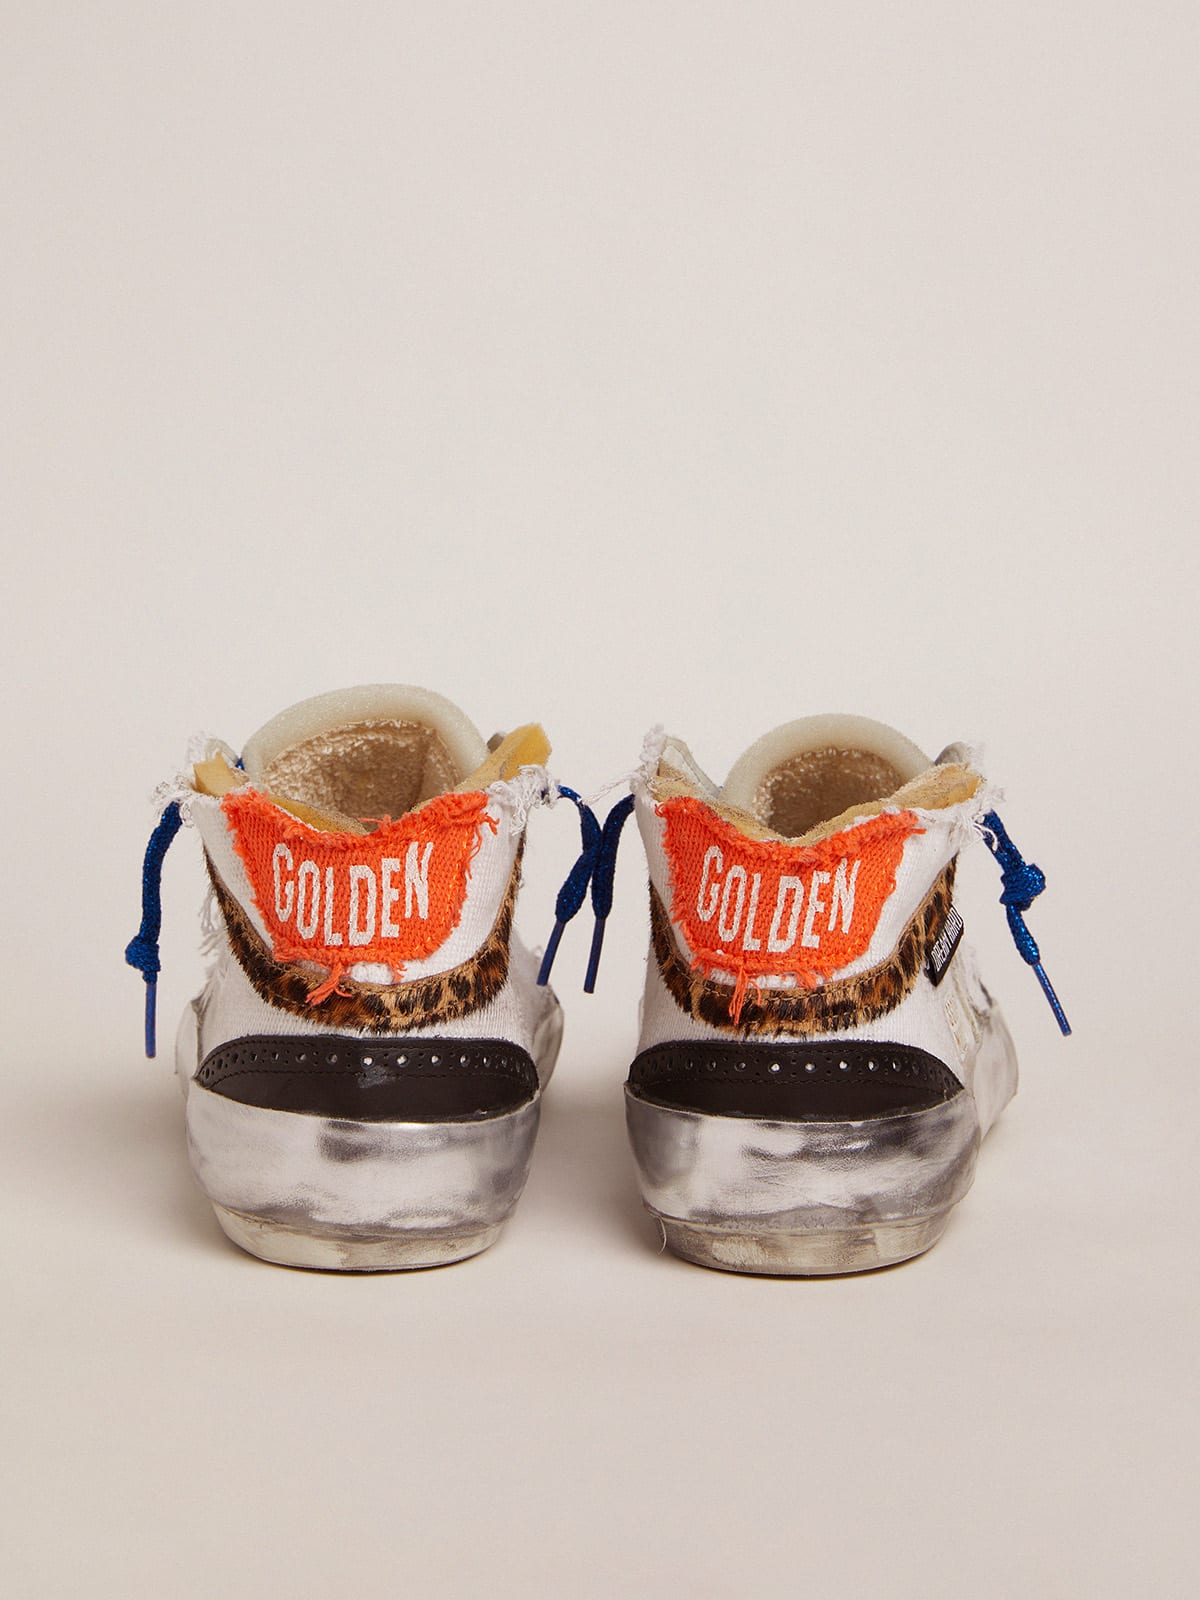 Golden Goose - Mid Star sneakers with white canvas upper and multi-foxing in 